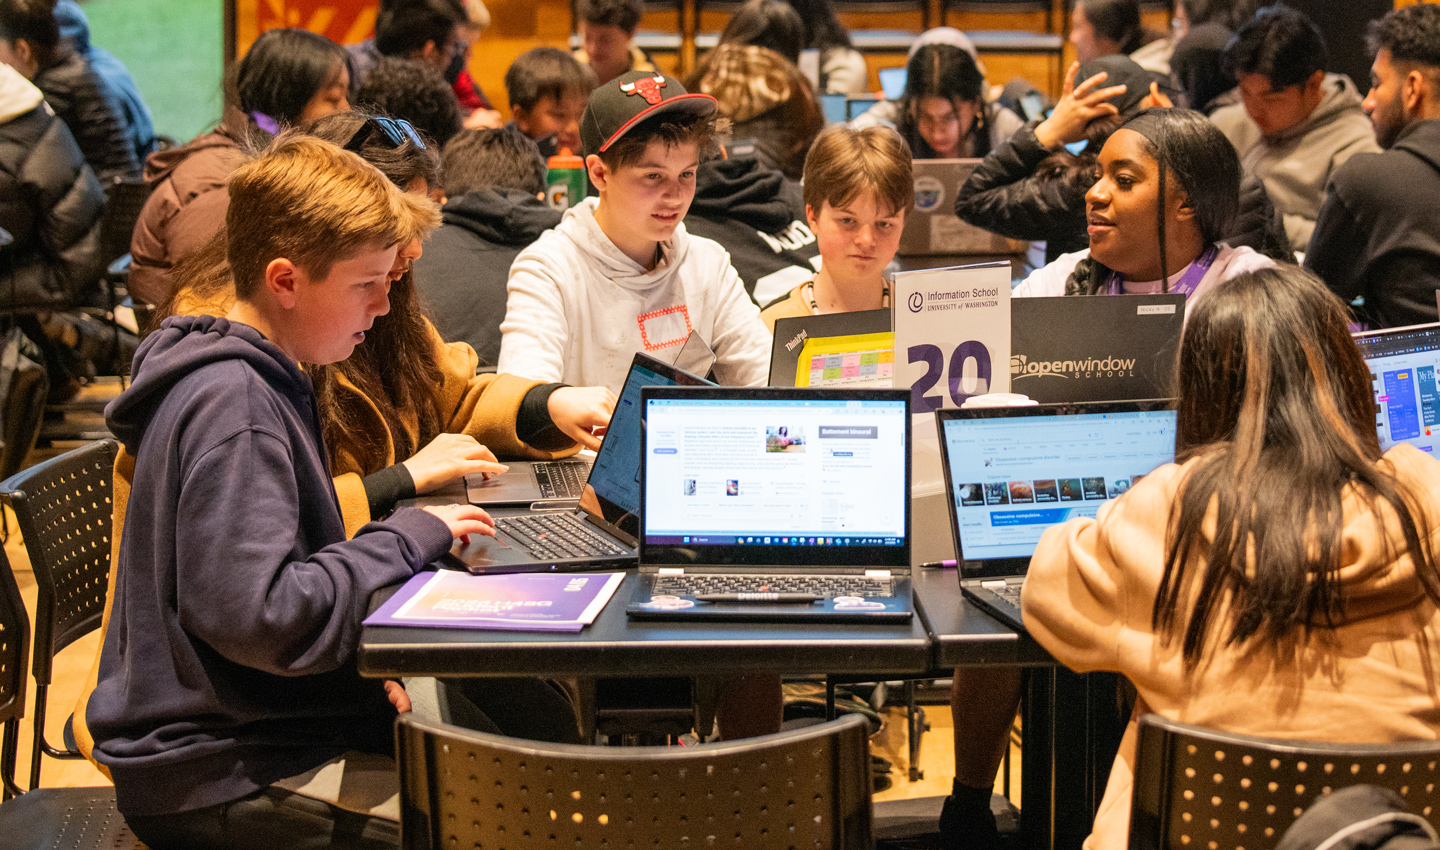 A student mentor helps kids at the Hack for Social Good hackathon